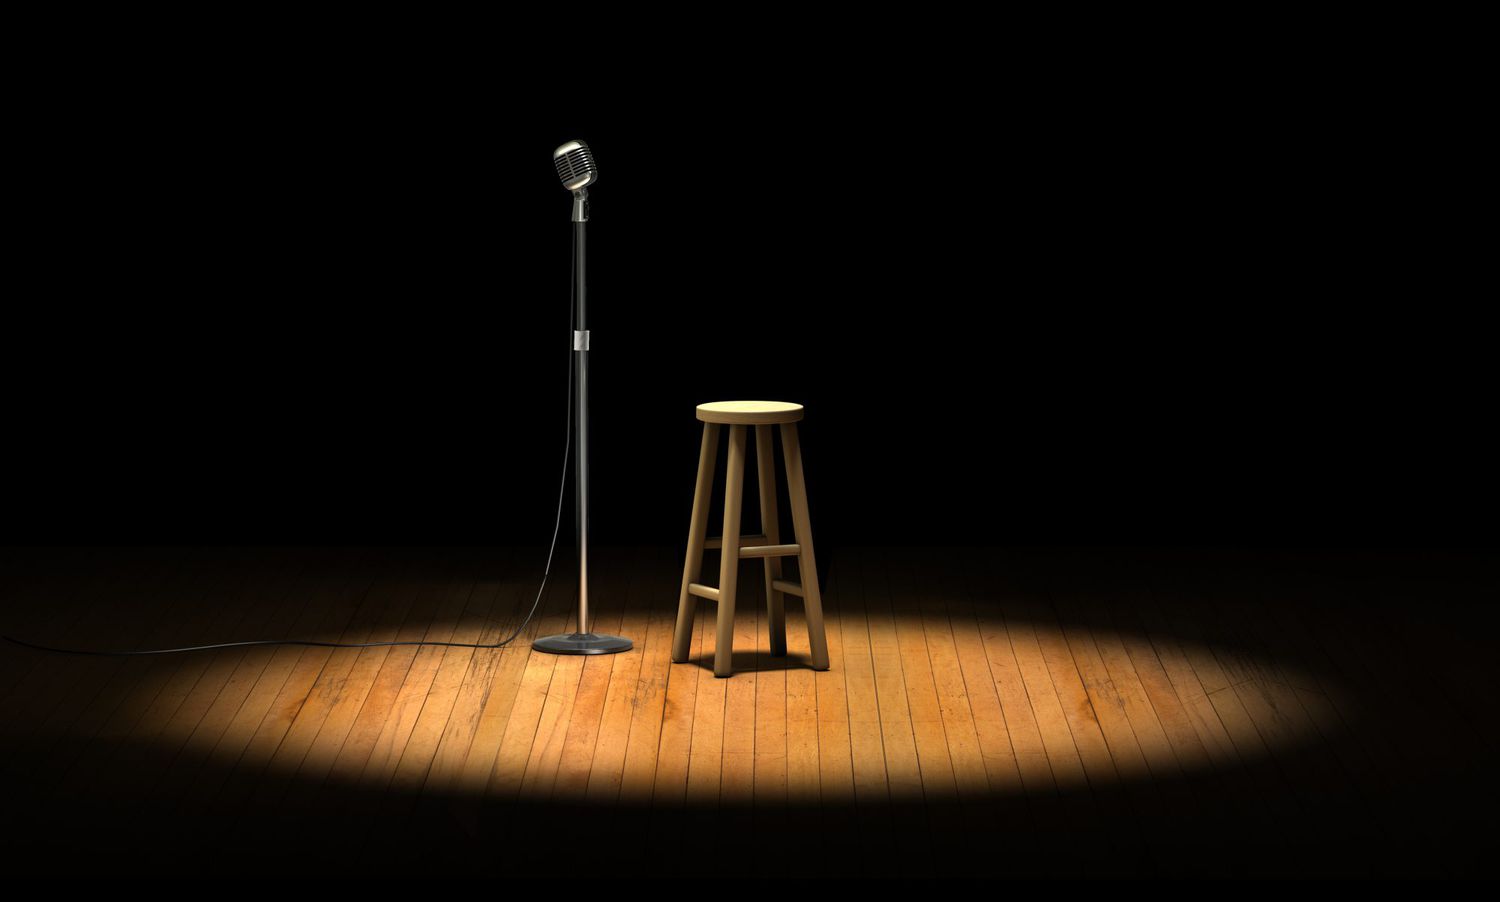 Dark stage with a microphone and empty stool with spot light on them